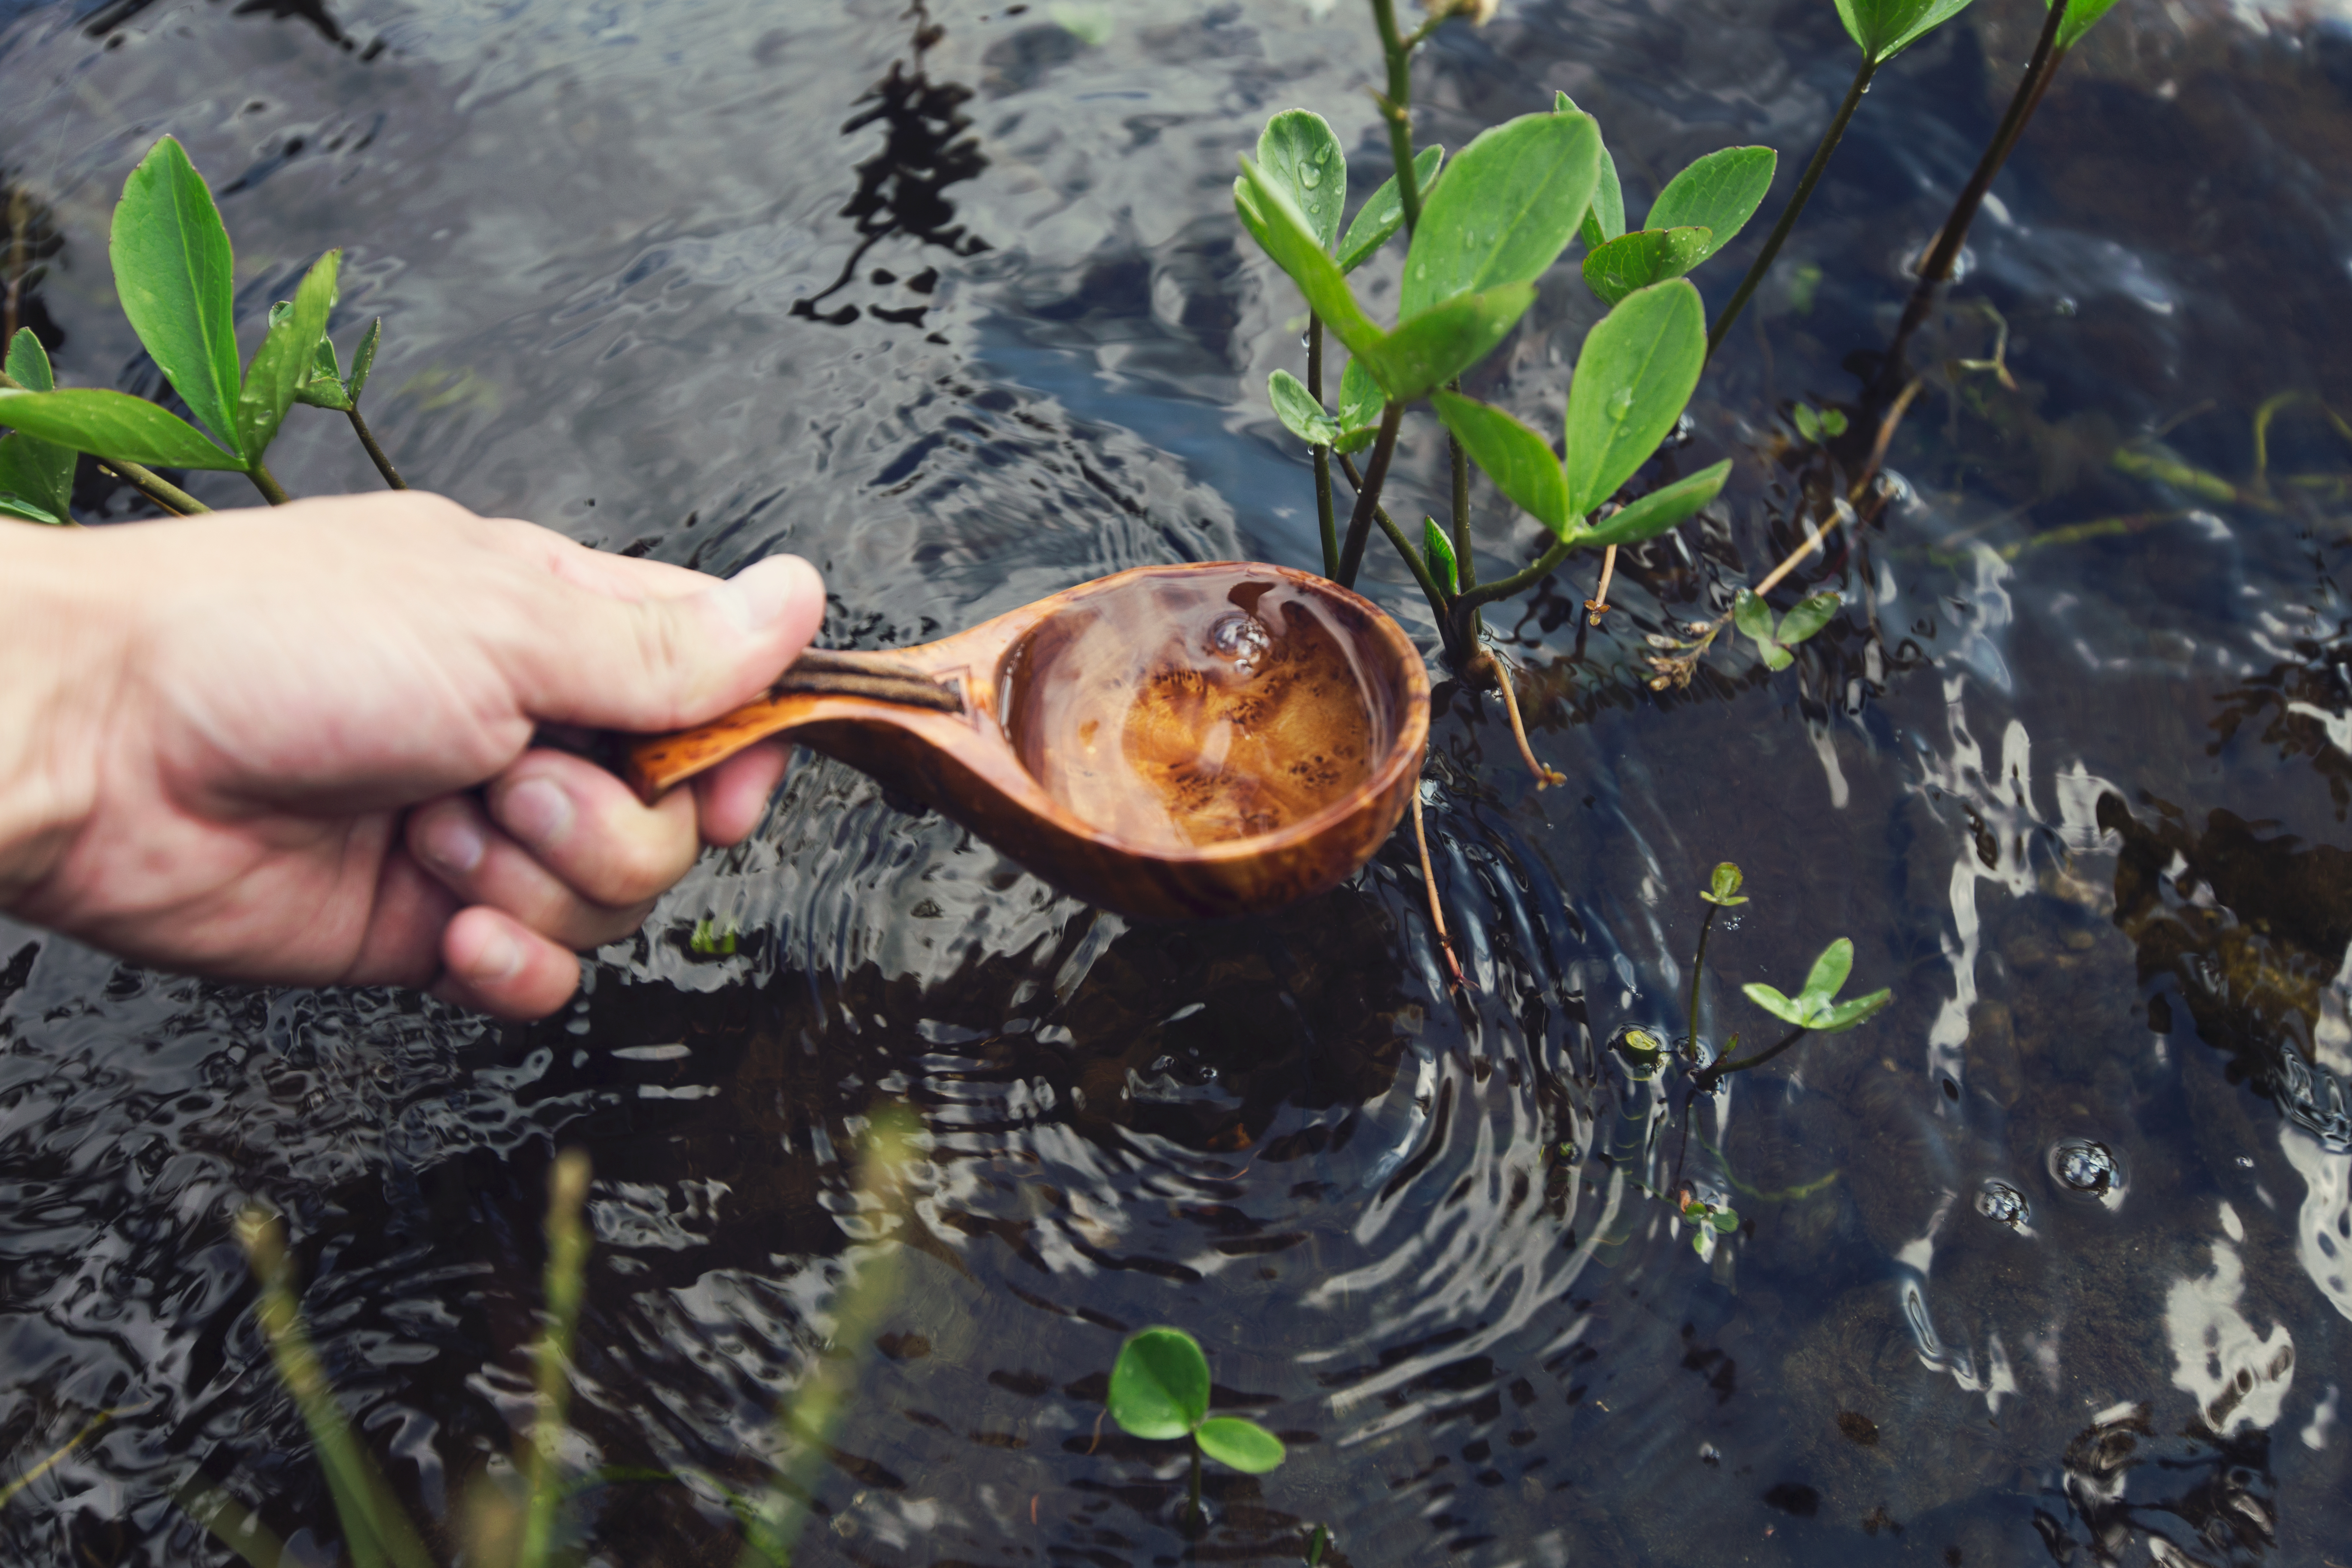 A person's hand is seen dipping a wooden spoon into a body of water, creating ripples on the surface. The image suggests mindfulness and relaxation. It could be used to represent the benefits of Dialectical Behavior Therapy in Connecticut, which helps individuals to regulate emotions and improve mindfulness skills.